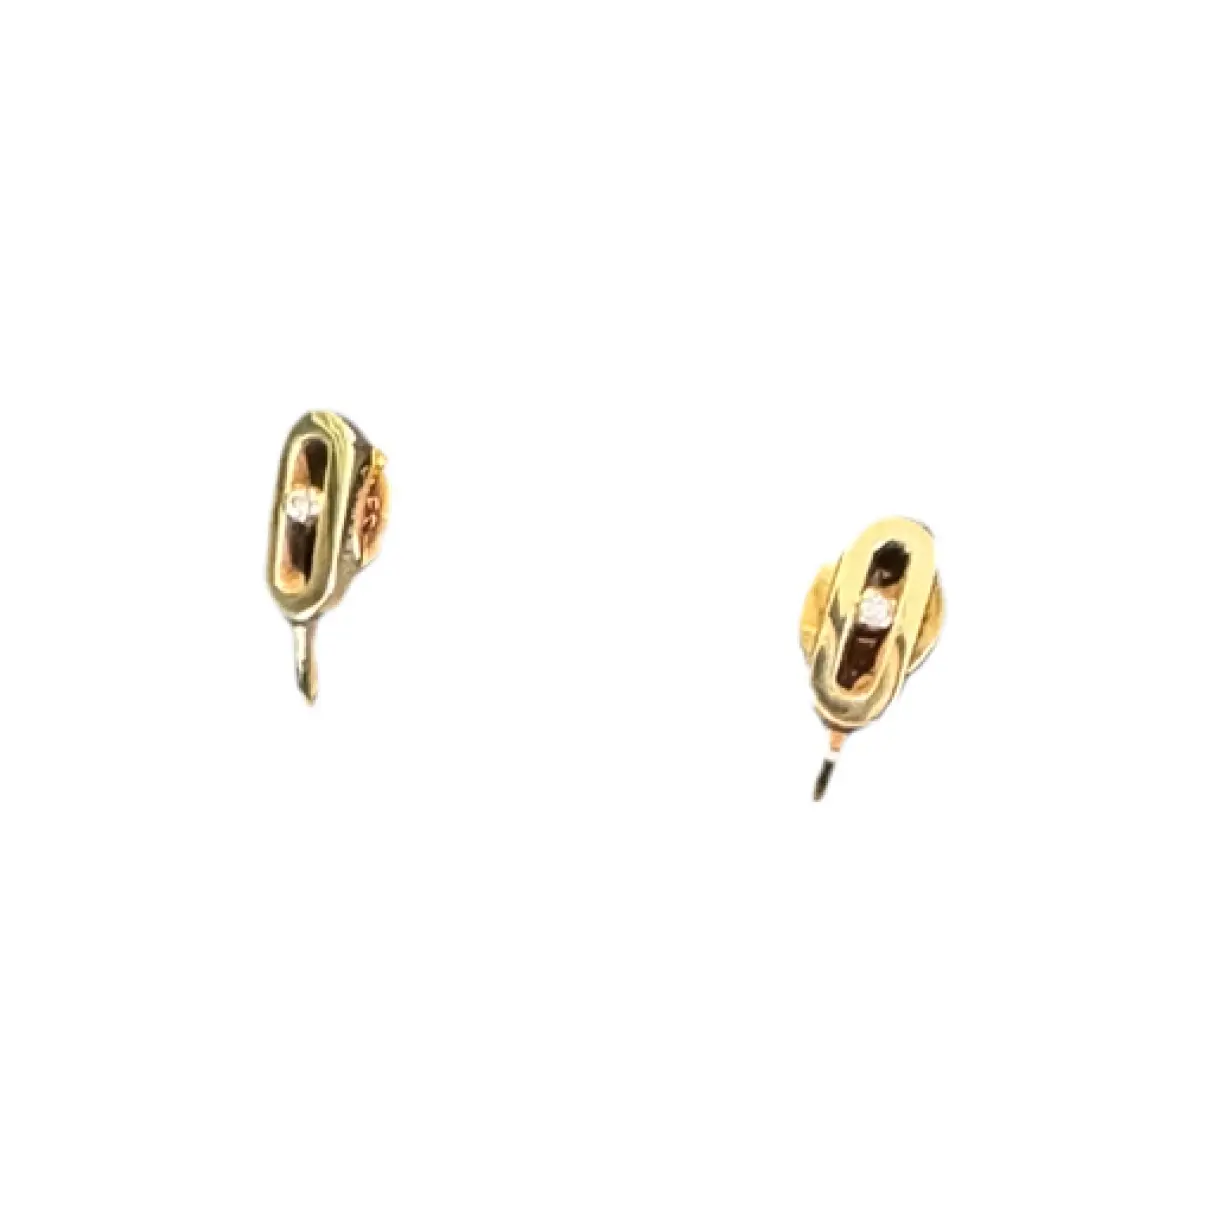 Move Classique yellow gold earrings